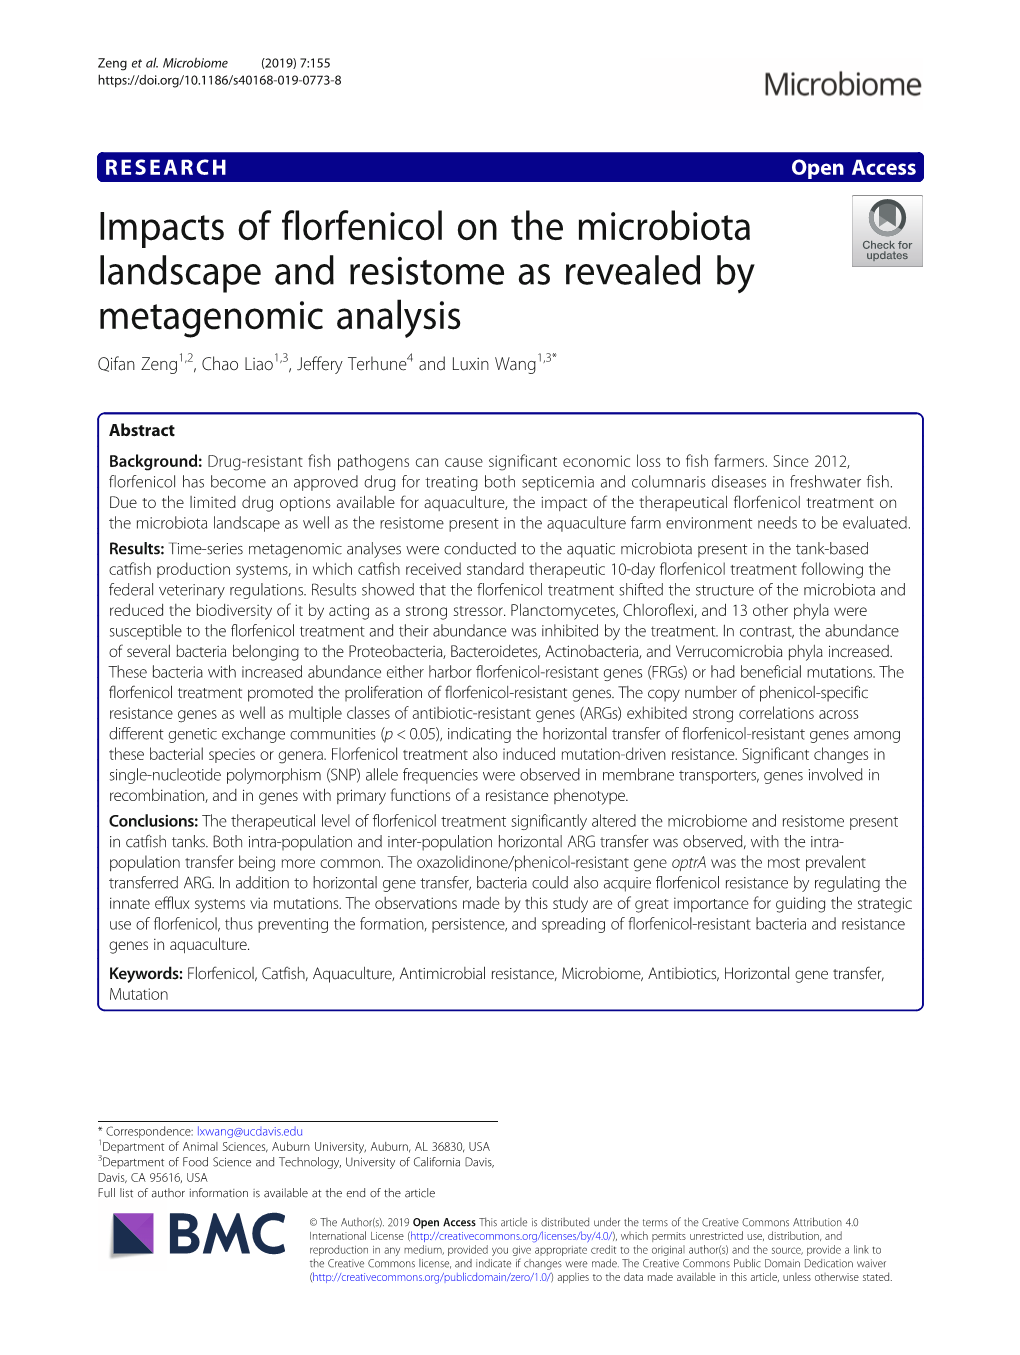 Impacts of Florfenicol on the Microbiota Landscape and Resistome As Revealed by Metagenomic Analysis Qifan Zeng1,2, Chao Liao1,3, Jeffery Terhune4 and Luxin Wang1,3*